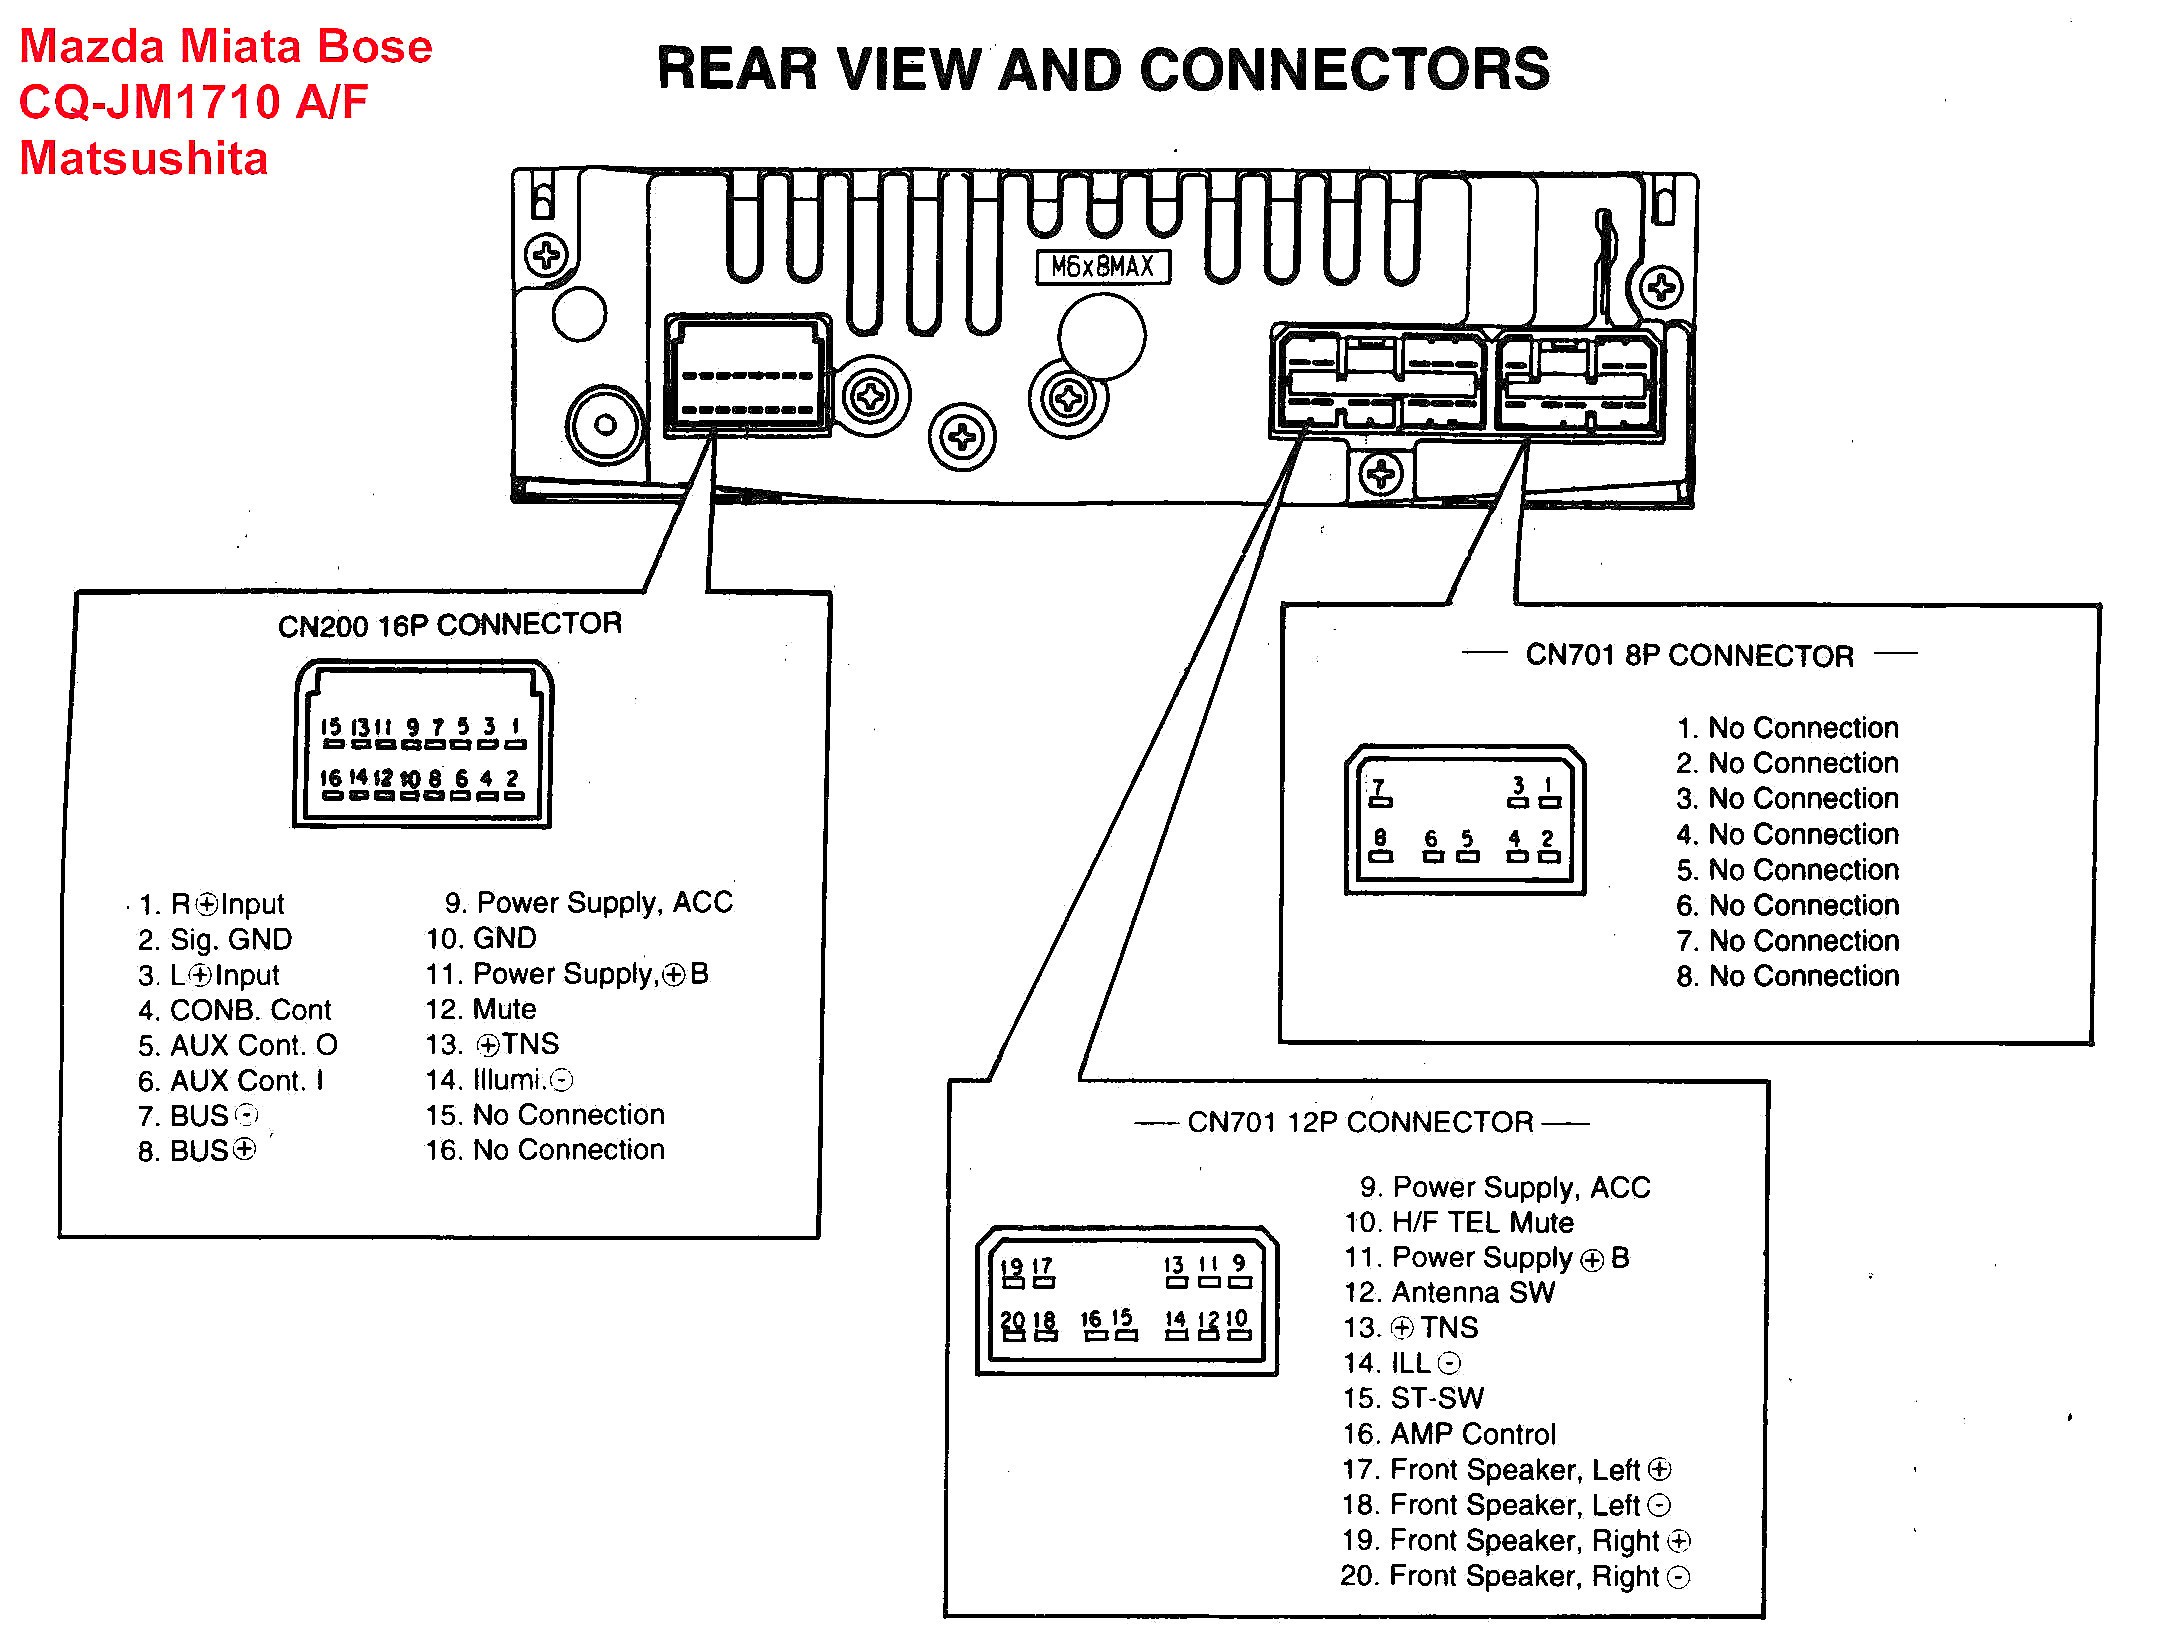 Wiring Diagram Color Abbreviations New Jvc Car Stereo Wiring Diagram Color Free within Kenwood Audio System